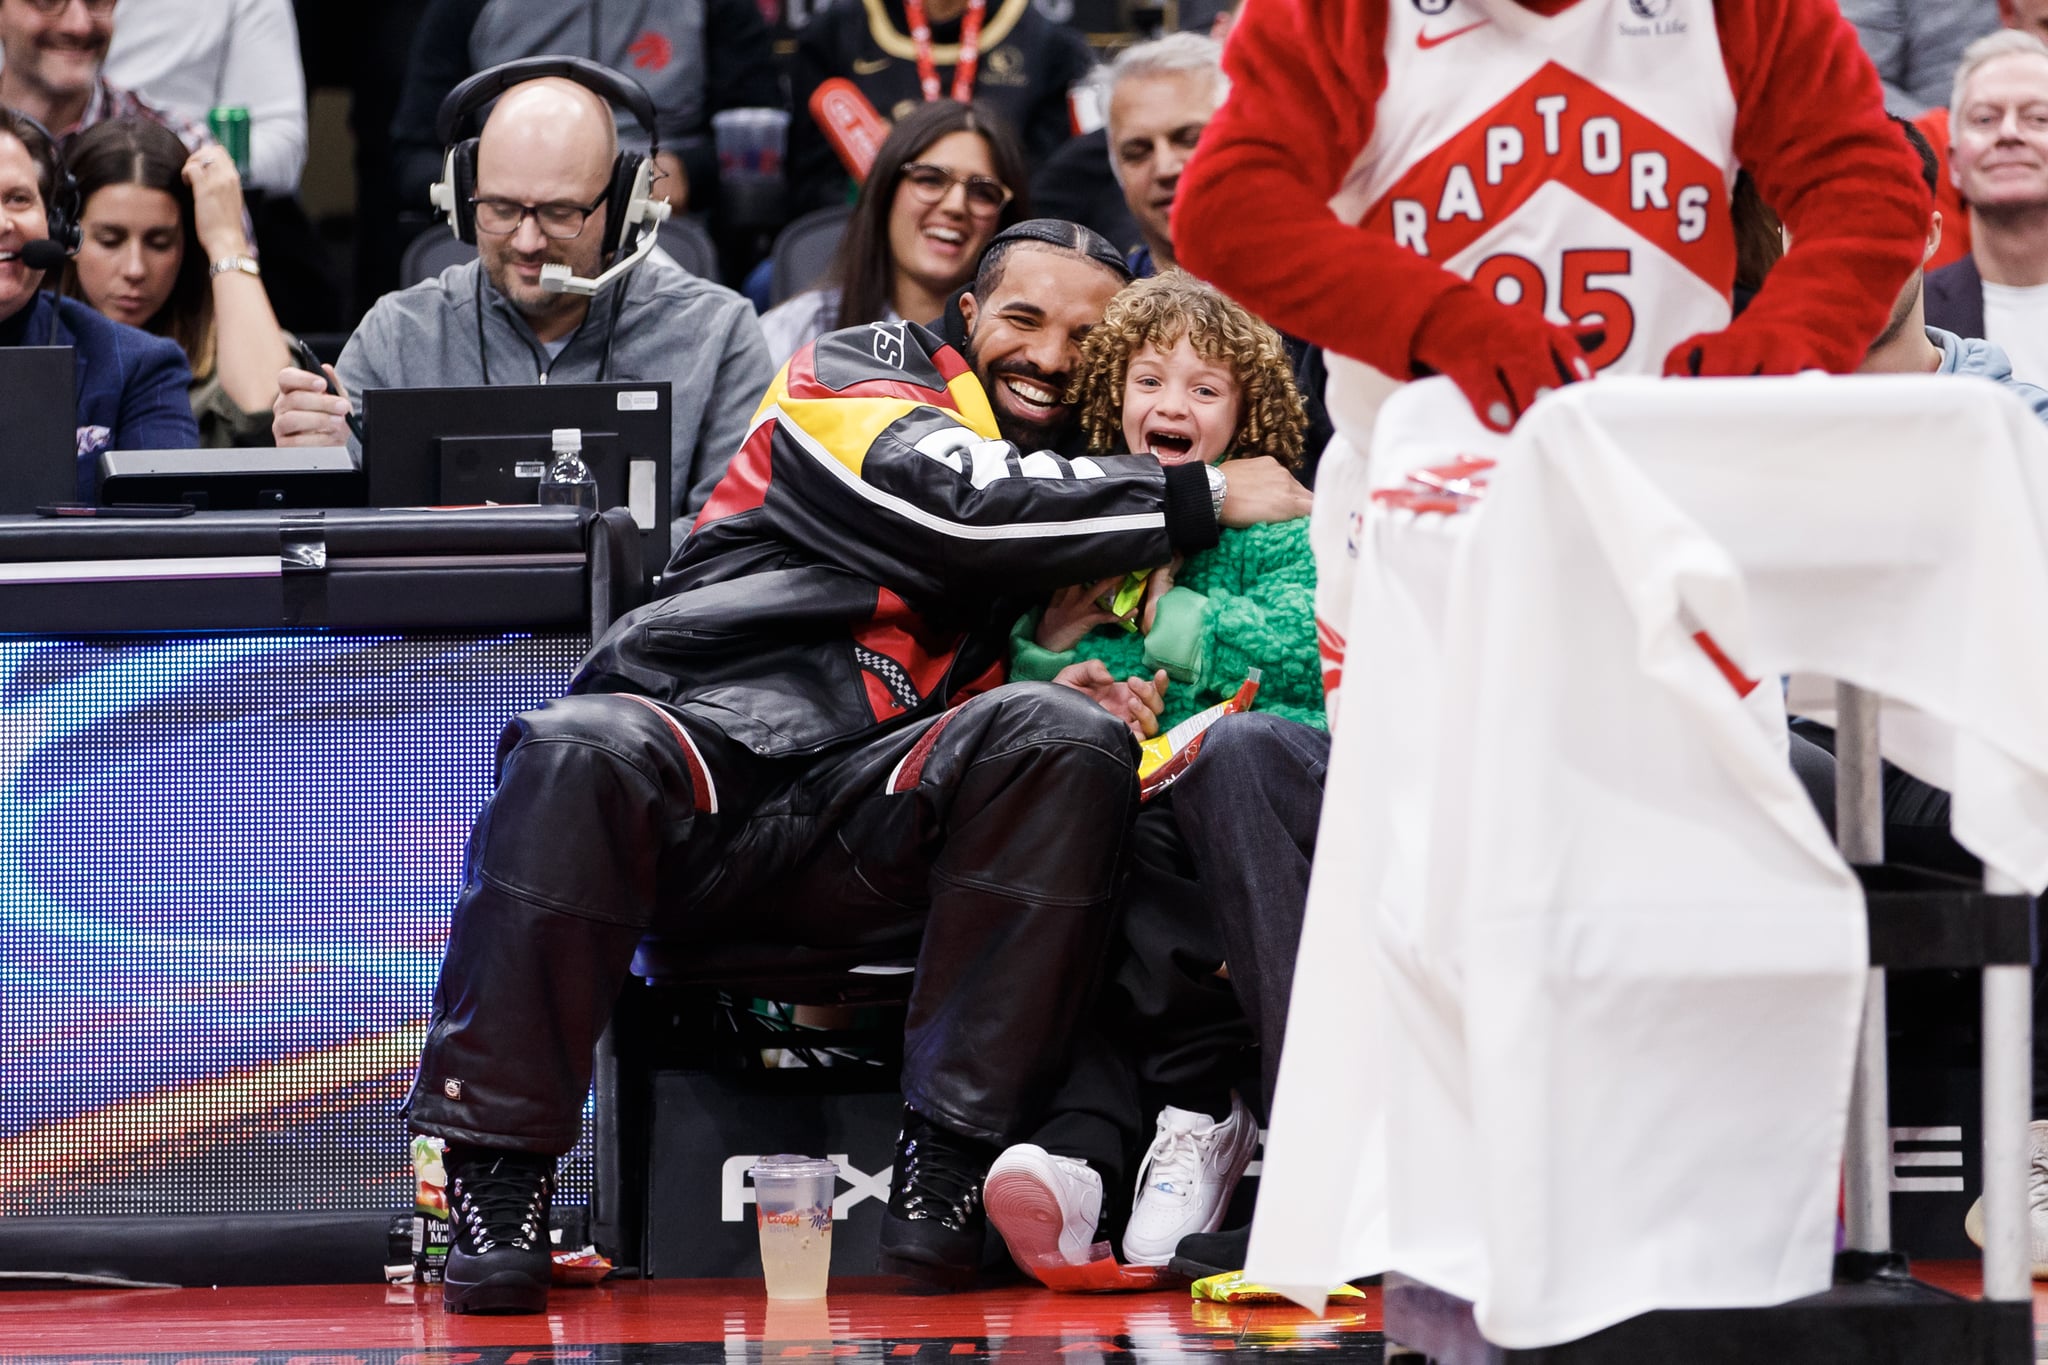 TORONTO, ON - DECEMBER 27: Rapper Drake embraces his son Adonis as the Raptor mascot brings over candy for him during the first half of the NBA game between the Toronto Raptors and the LA Clippers at Scotiabank Arena on December 27, 2022 in Toronto, Canada. Photo by Cole Burston/Getty Images)